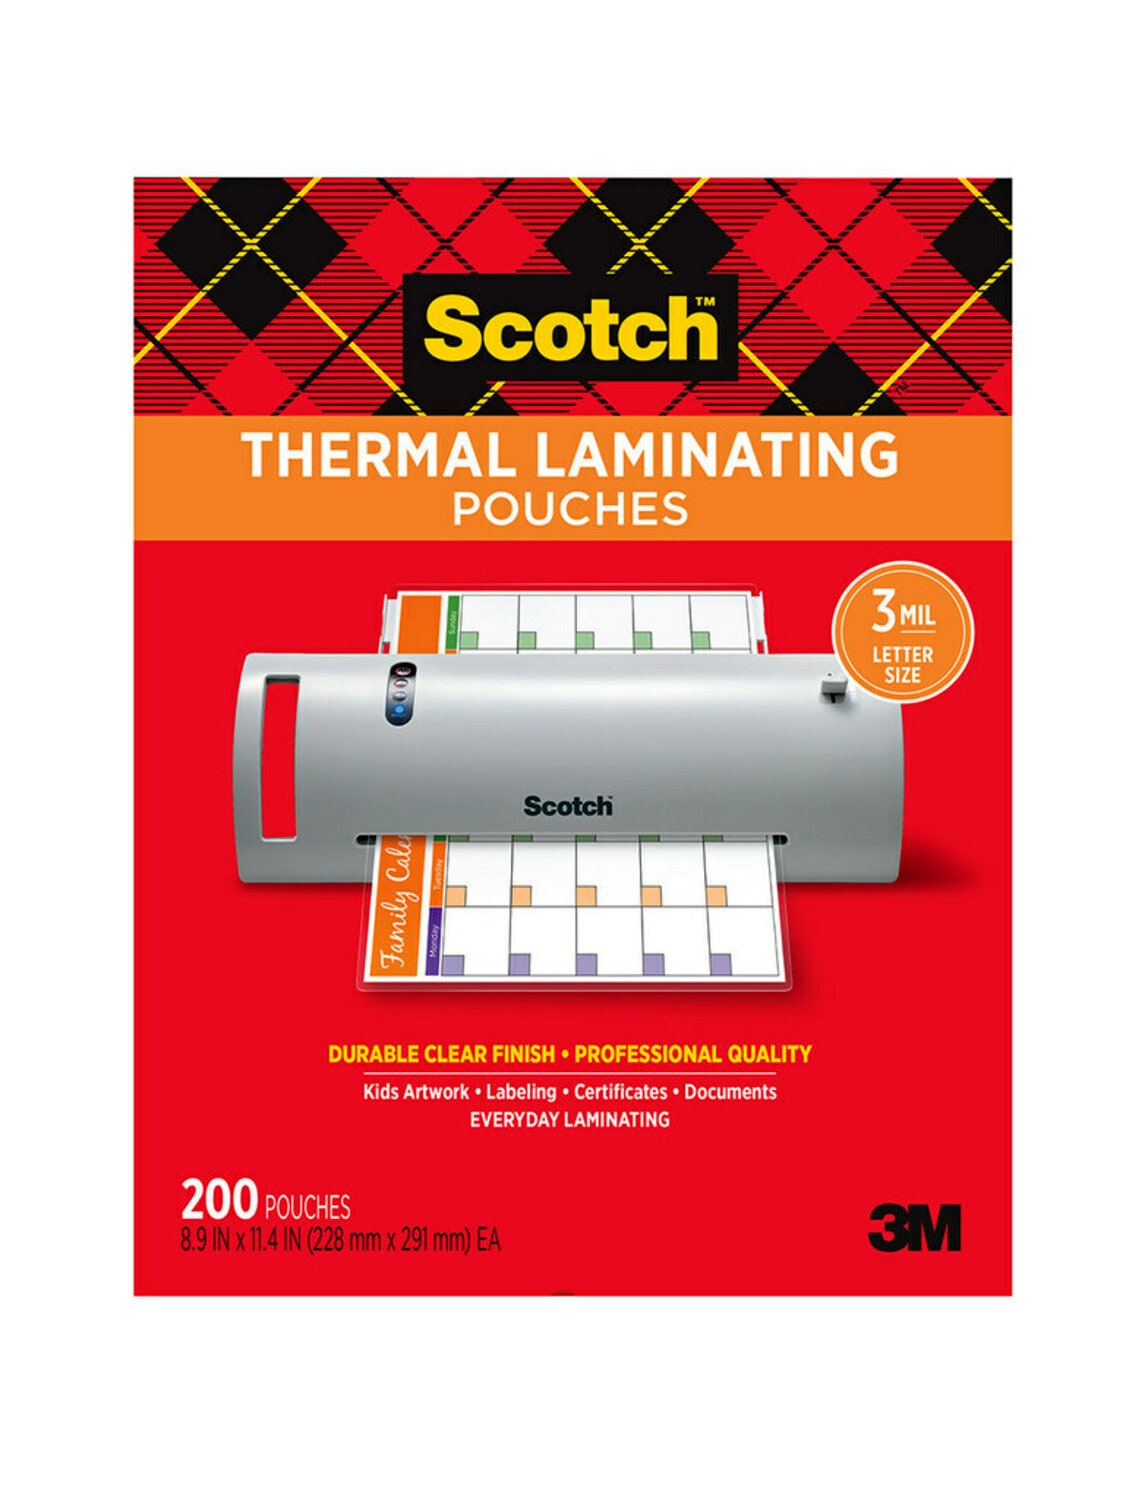 7100233538 - Scotch Thermal Pouches TP3854-200, 8.9 in x 11.4 in (228 mm x 291 mm)